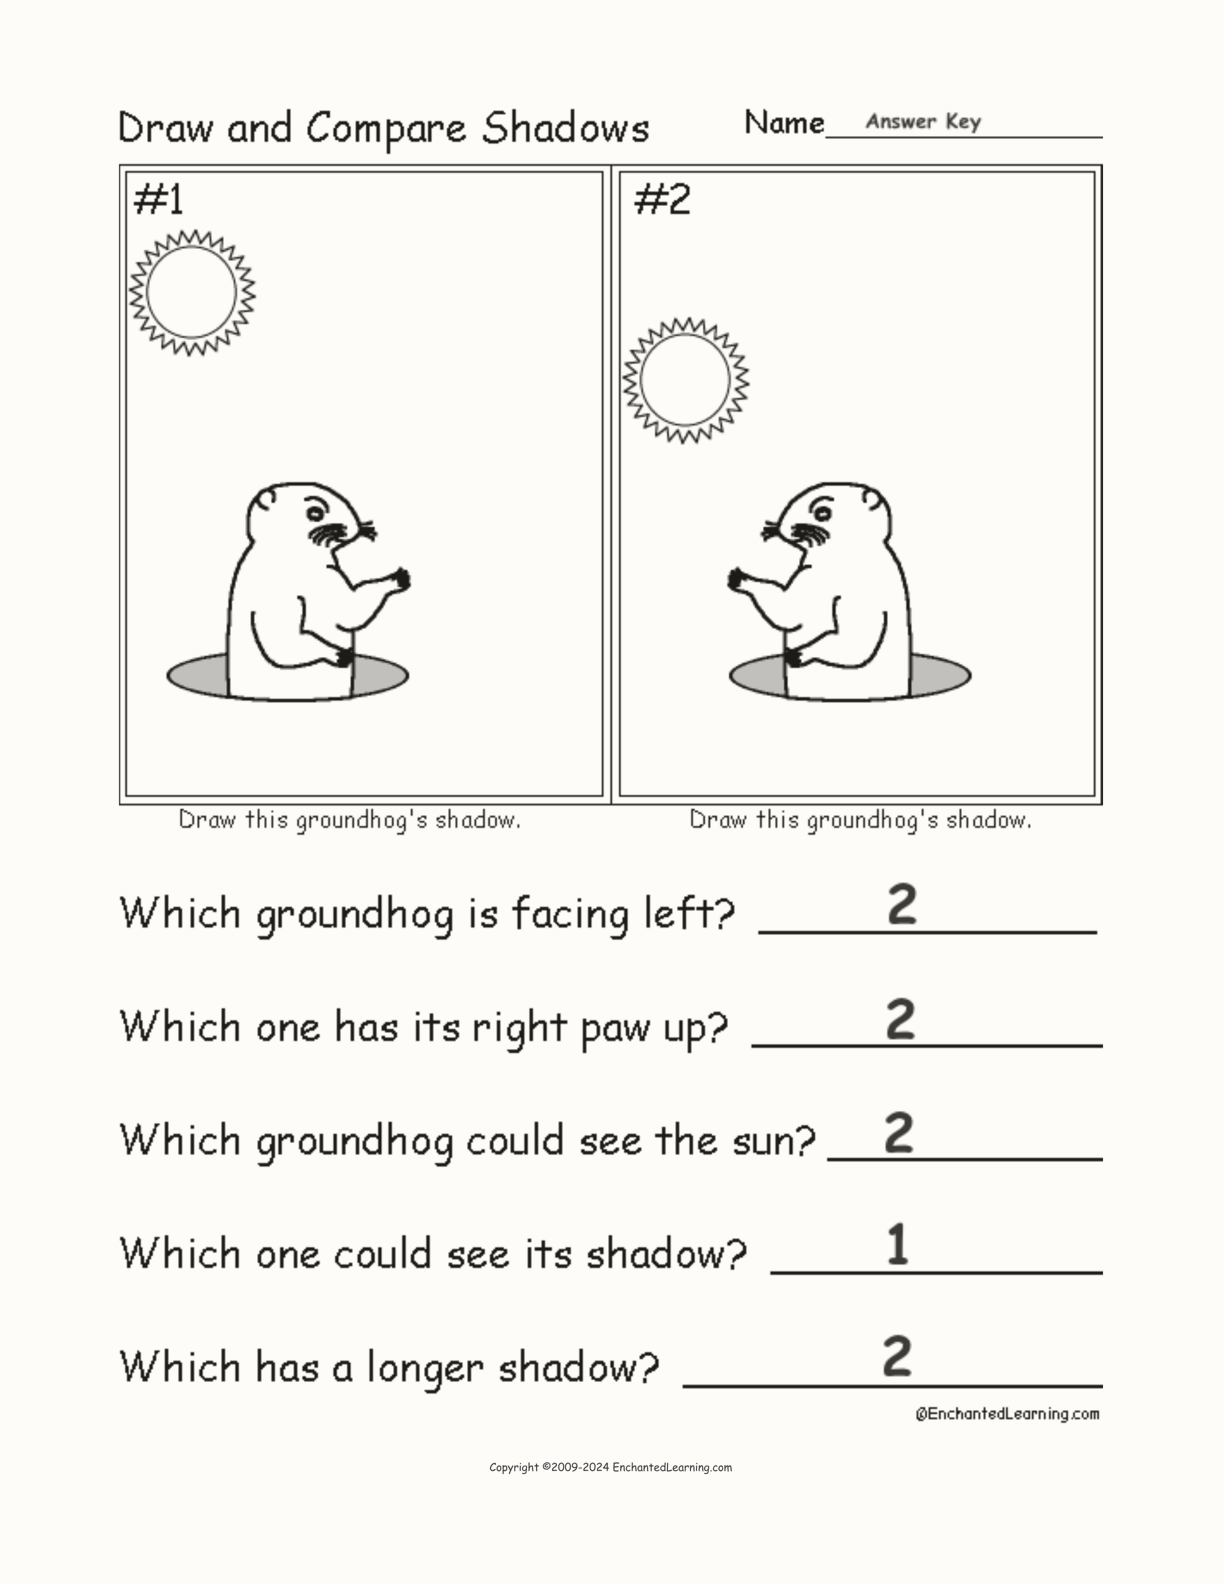 Draw and Compare Groundhog Shadows interactive worksheet page 2